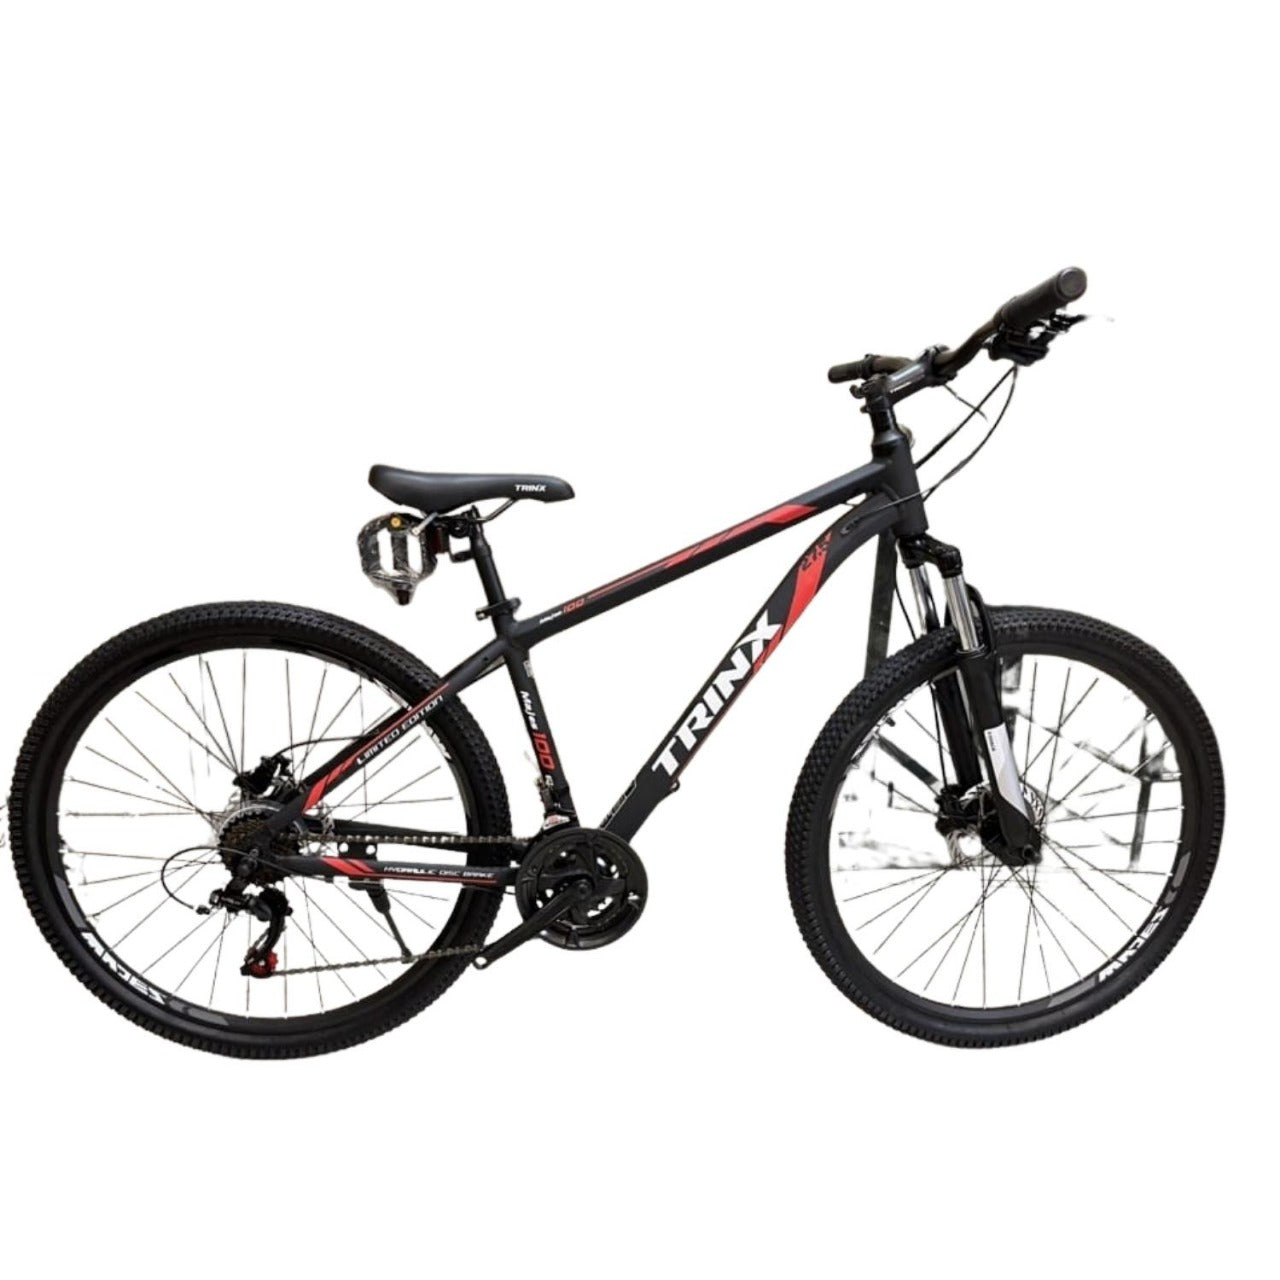 MOUNTAIN BIKE TRINX M100 LIMITED EDITION ALLOY 29"